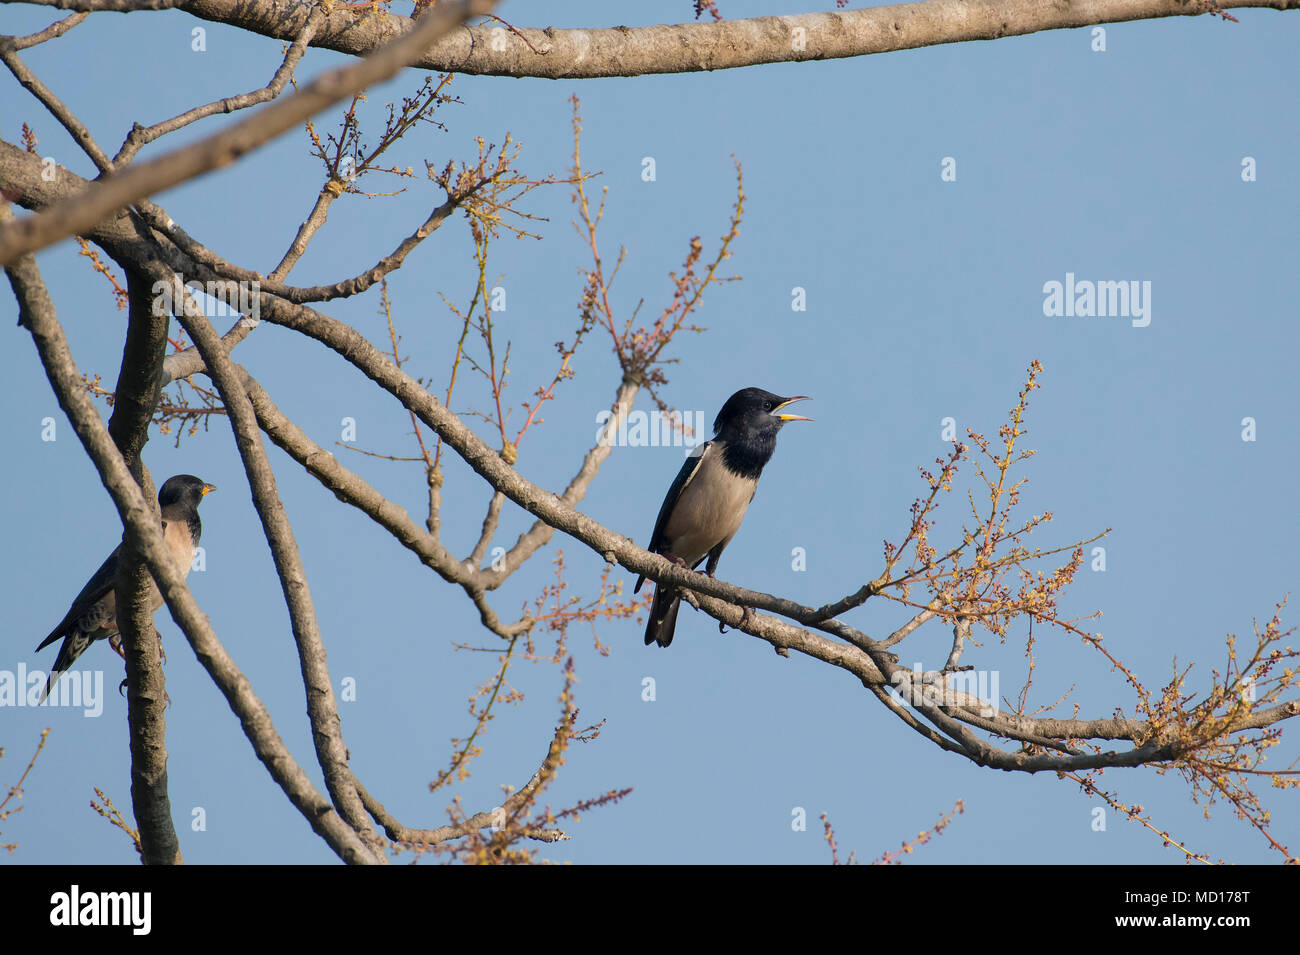 Bird: Pair of  Rosy Starling Perched on a Tree Branch Stock Photo